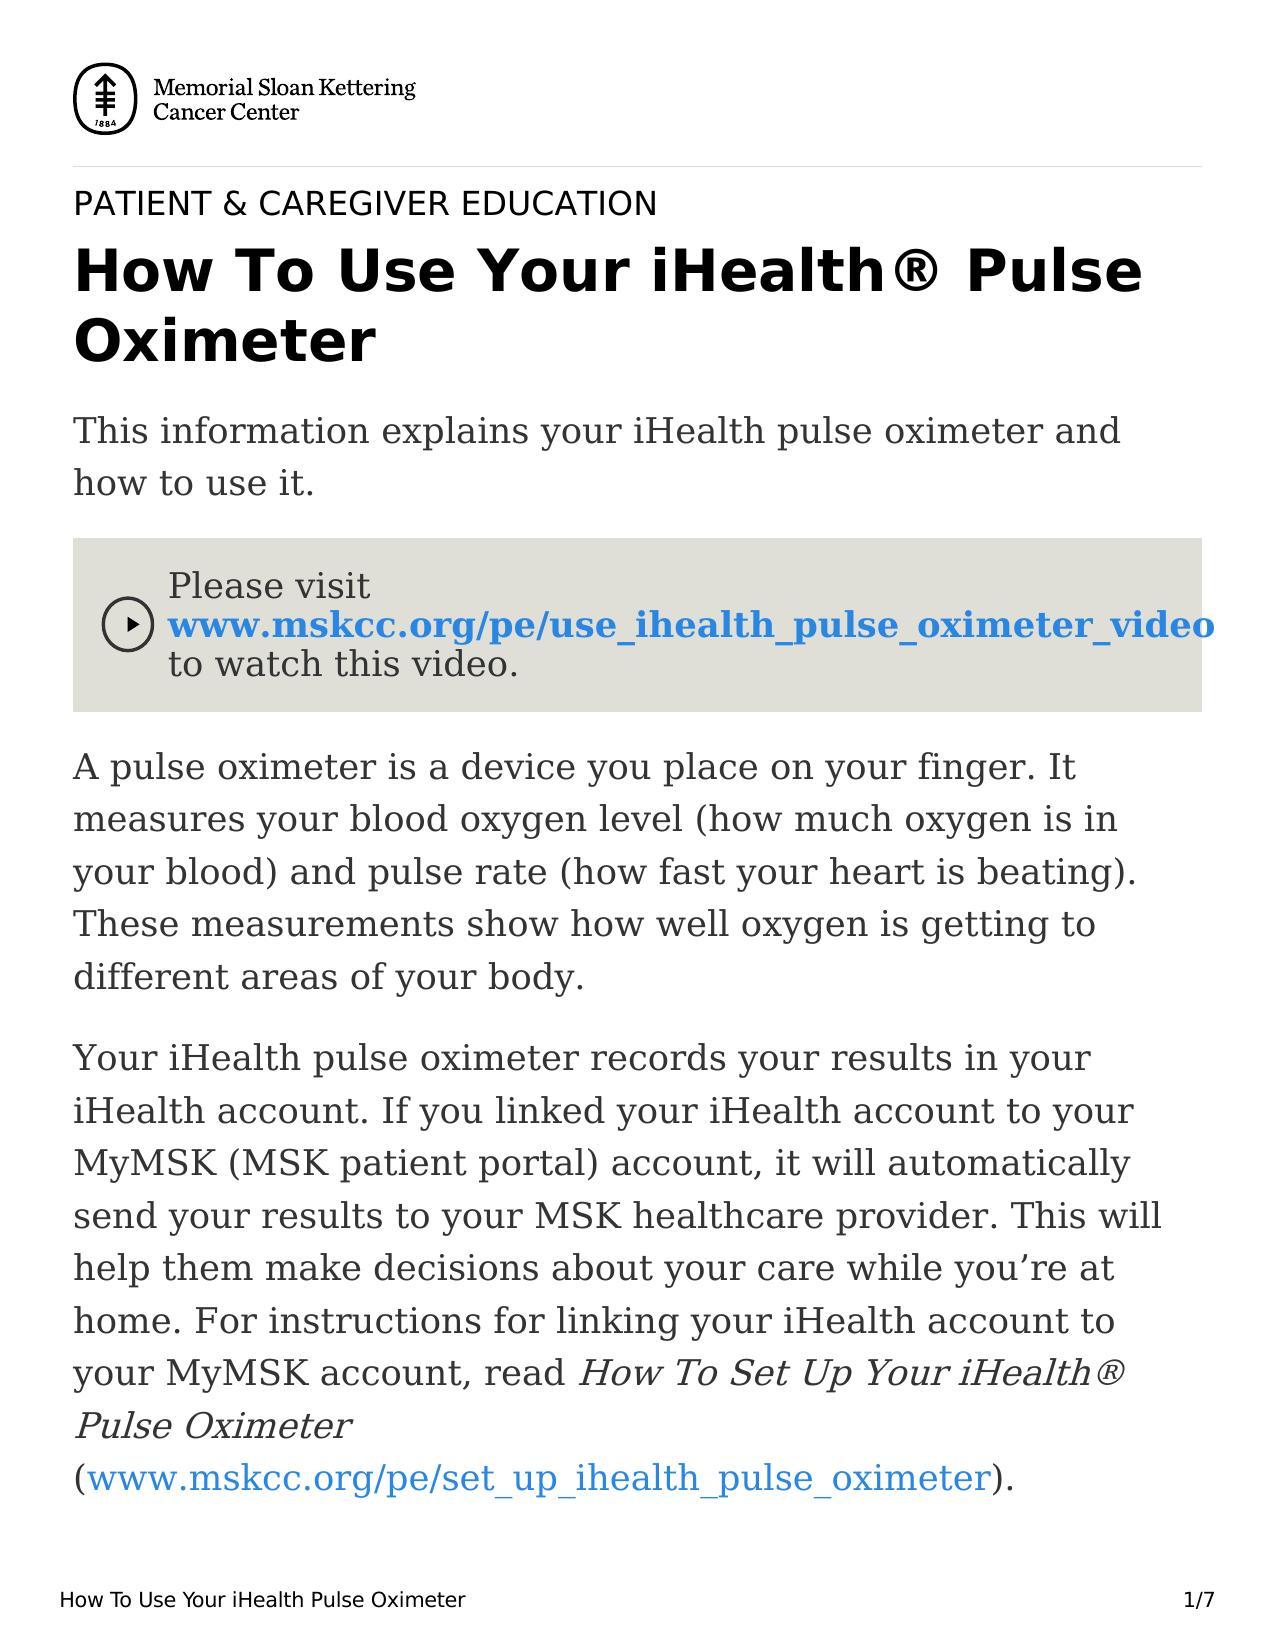 how-to-use-your-ihealth-pulse-oximeter.pdf